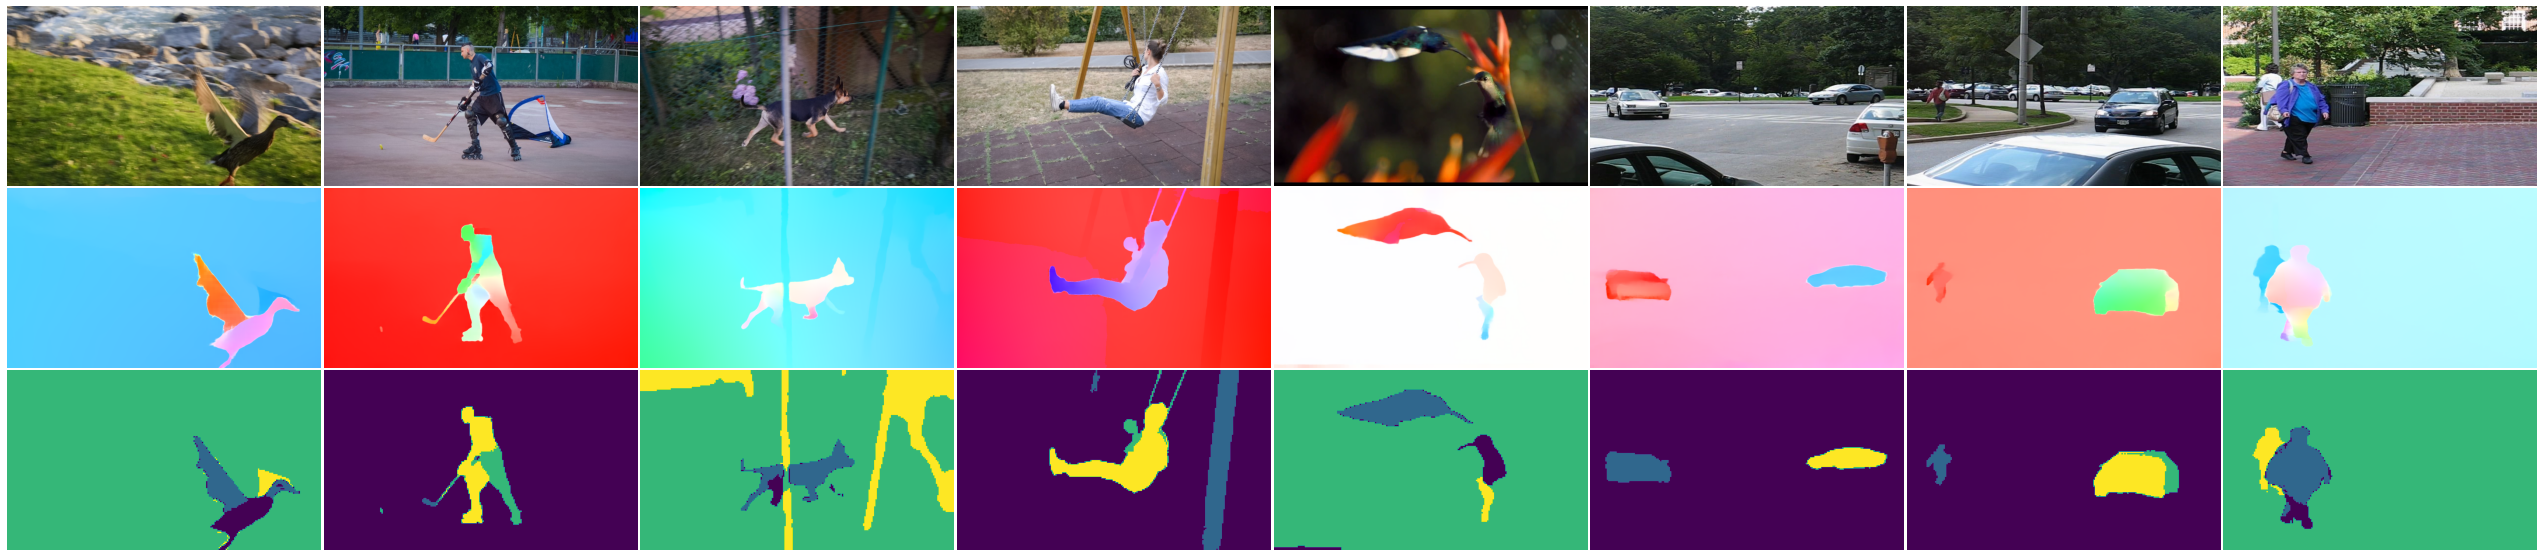 Results obtained with the EM-driven unsupervised learning method for four masks (K=4K=4) regarding multiple motion segmentation. First row: one image of the video. Second row: input optical flow displayed with the HSV color code. Third row: motion segmentation maps with four masks, one color per mask (the four masks may be not present if not necessary). We adopt the same color code for all segmentation maps (dark blue: mask 1, light blue: mask 2, green: mask 3, yellow: mask 4). Examples are drawn from DAVIS2016, FBMS59 and SegTrackV2 datasets.